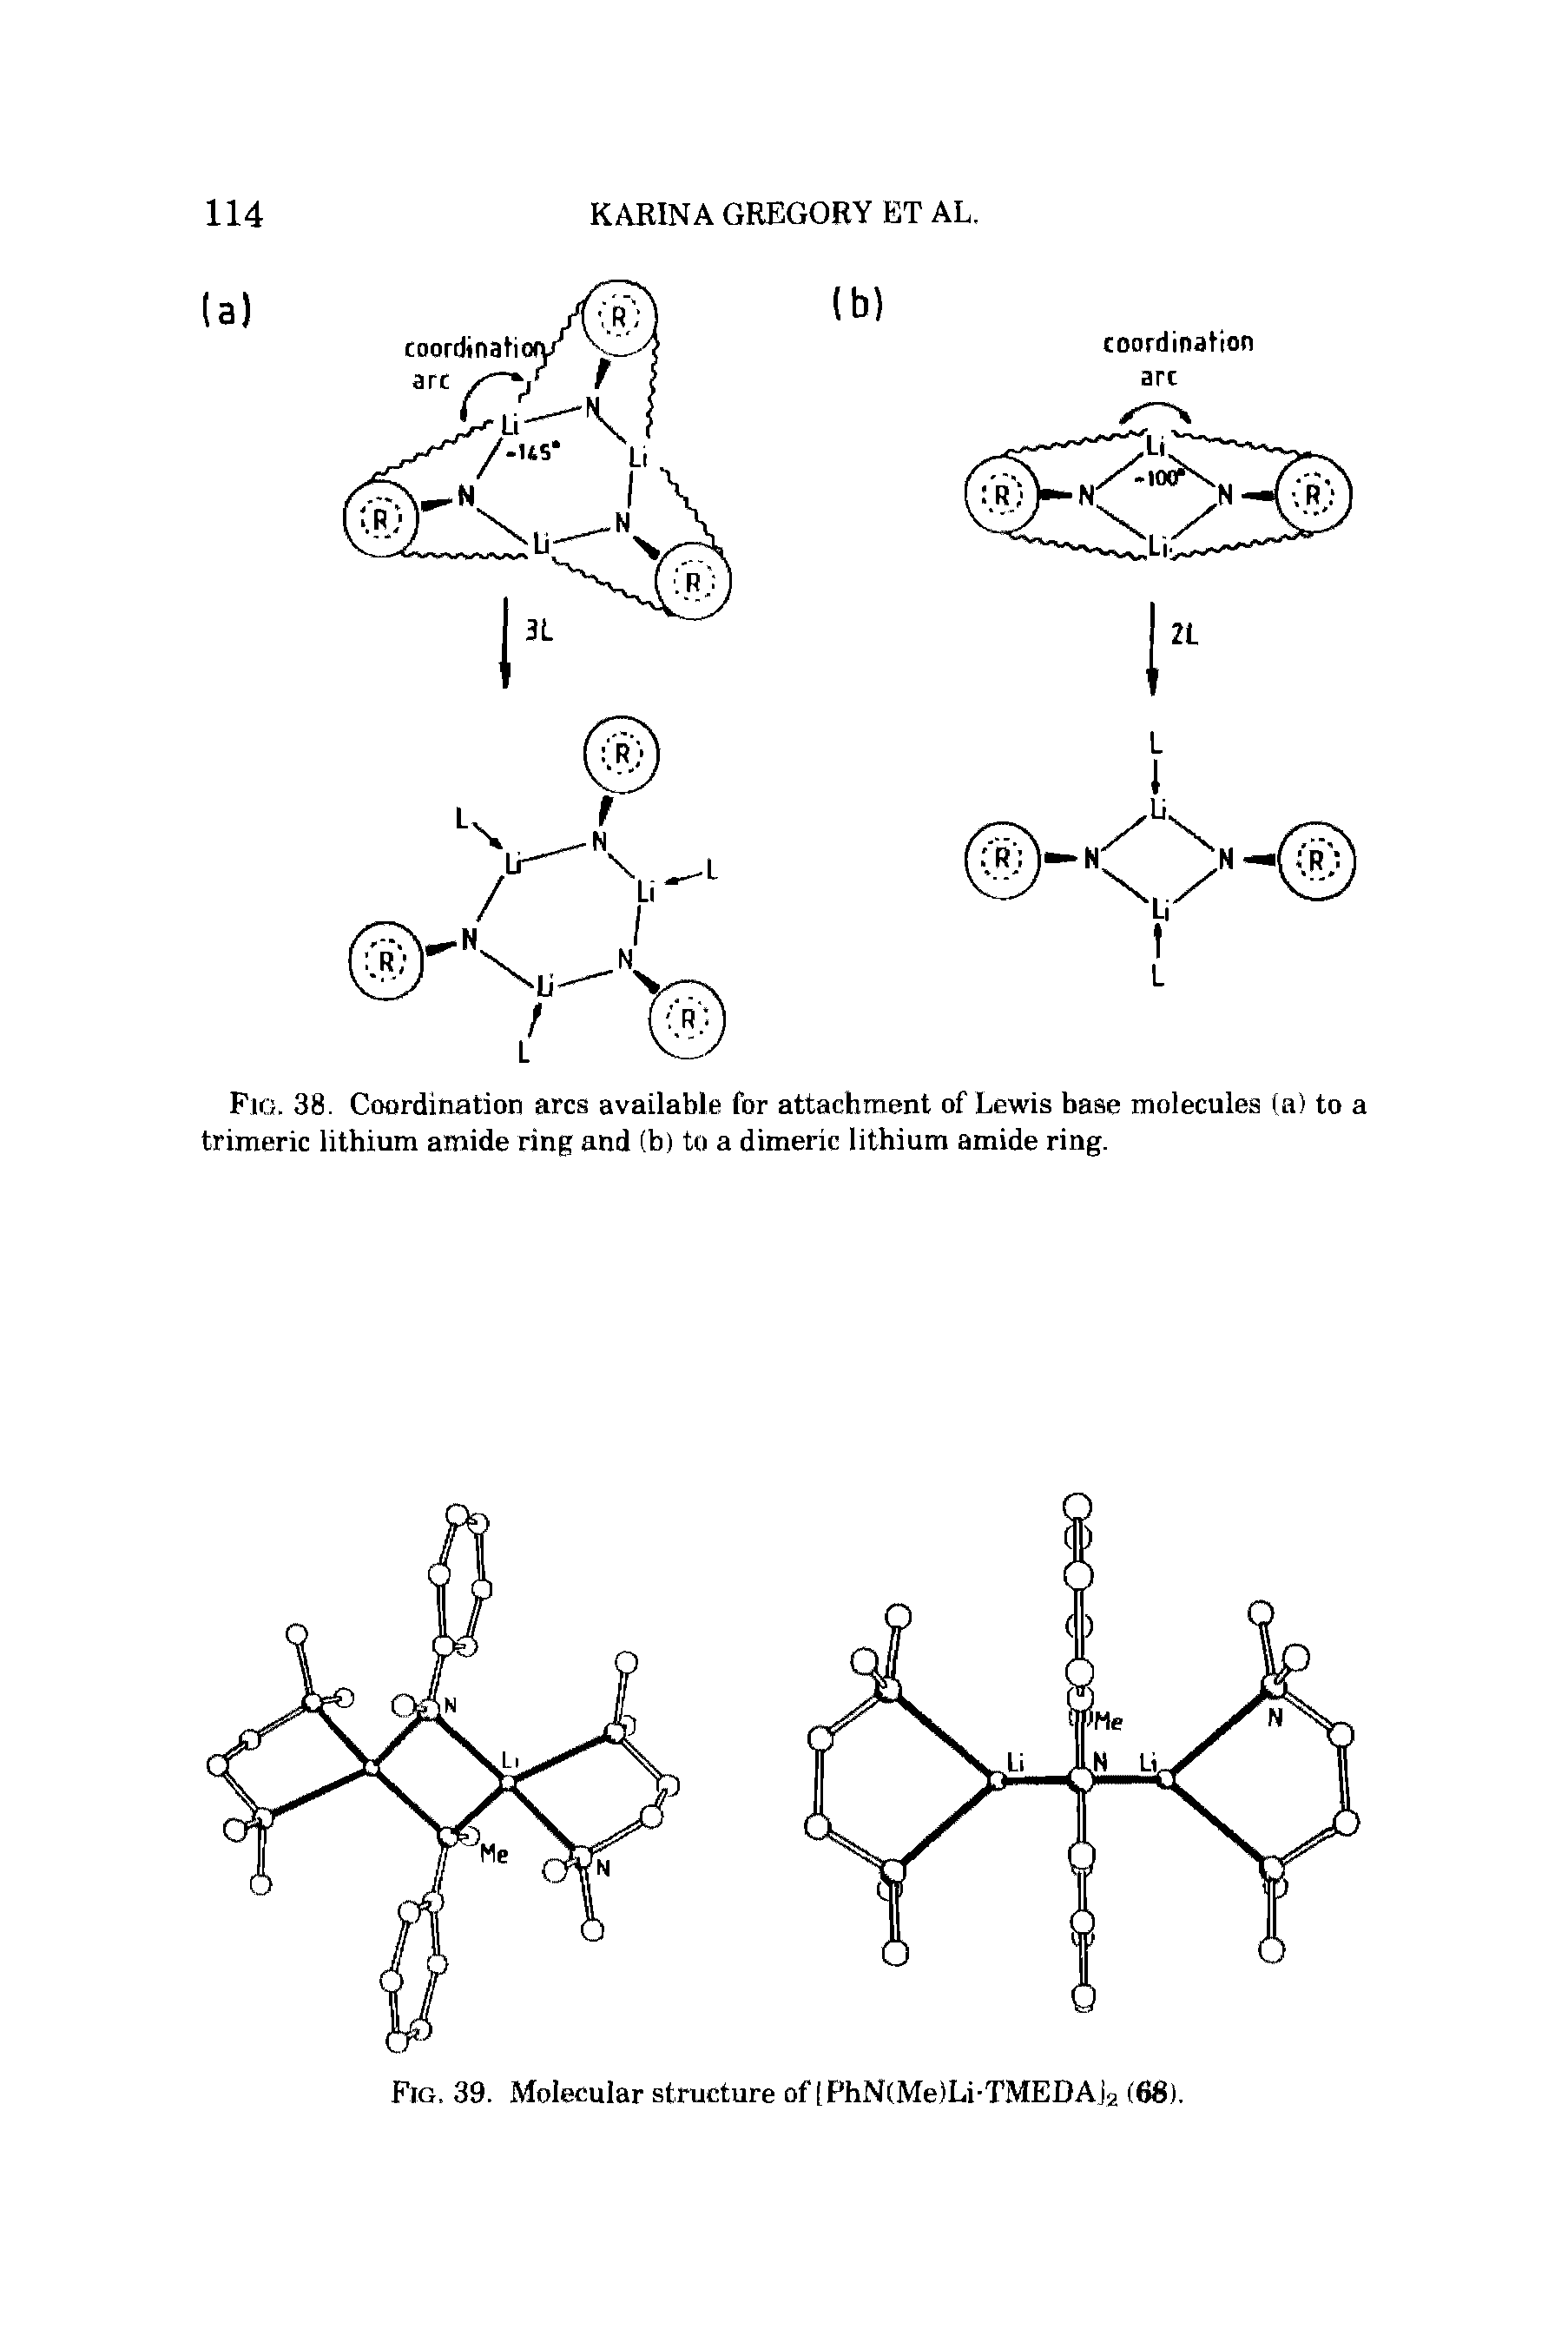 Fig. 38. Coordination arcs available for attachment of Lewis base molecules (a) to a trimeric lithium amide ring and (b) to a dimeric lithium amide ring.